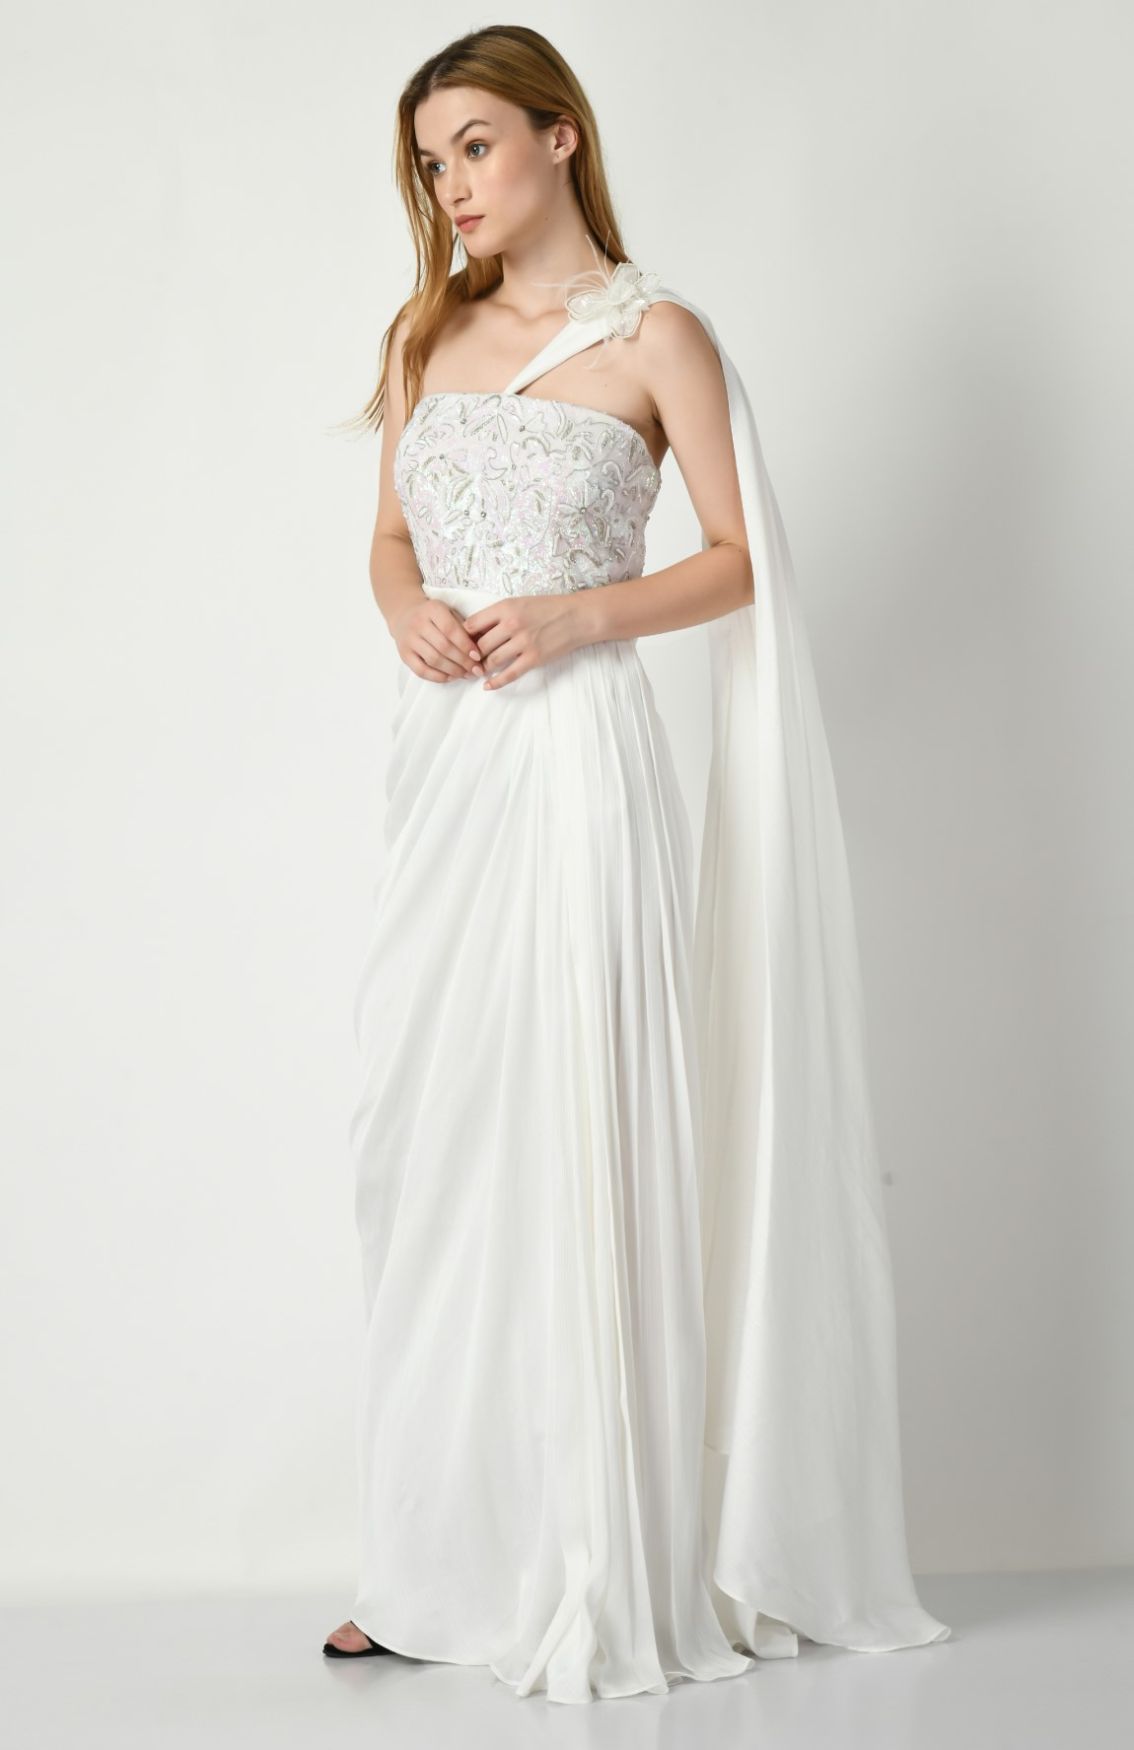 White Gown With Unicorn Colored Sequin Embroidery On Bodice 